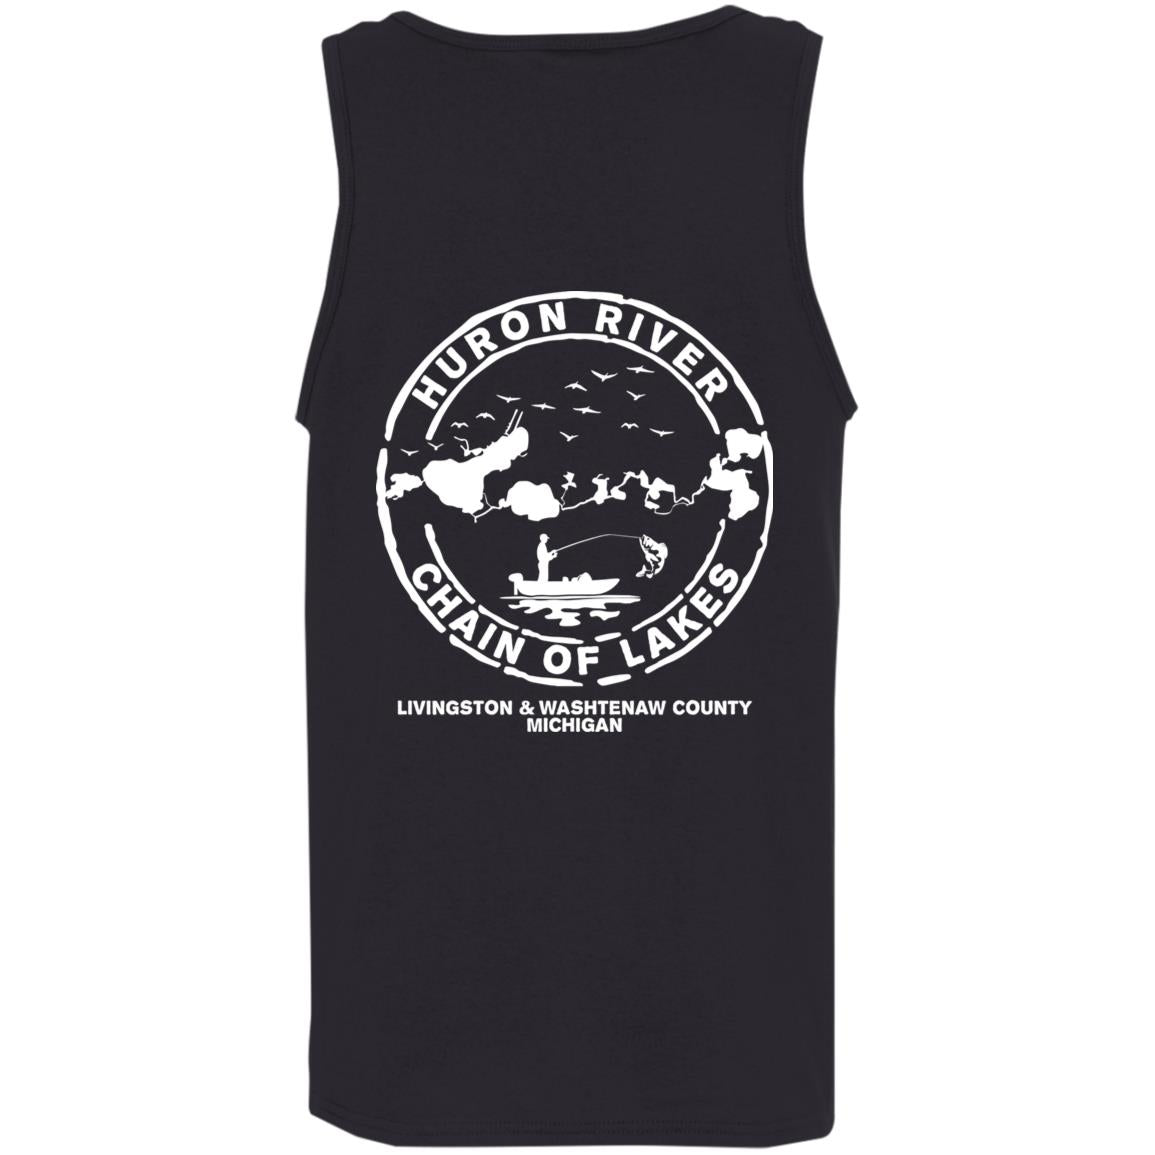 HRCL FL - More Fun To Put In Than Pull Out - 2 Sided G520 Cotton Tank Top 5.3 oz.